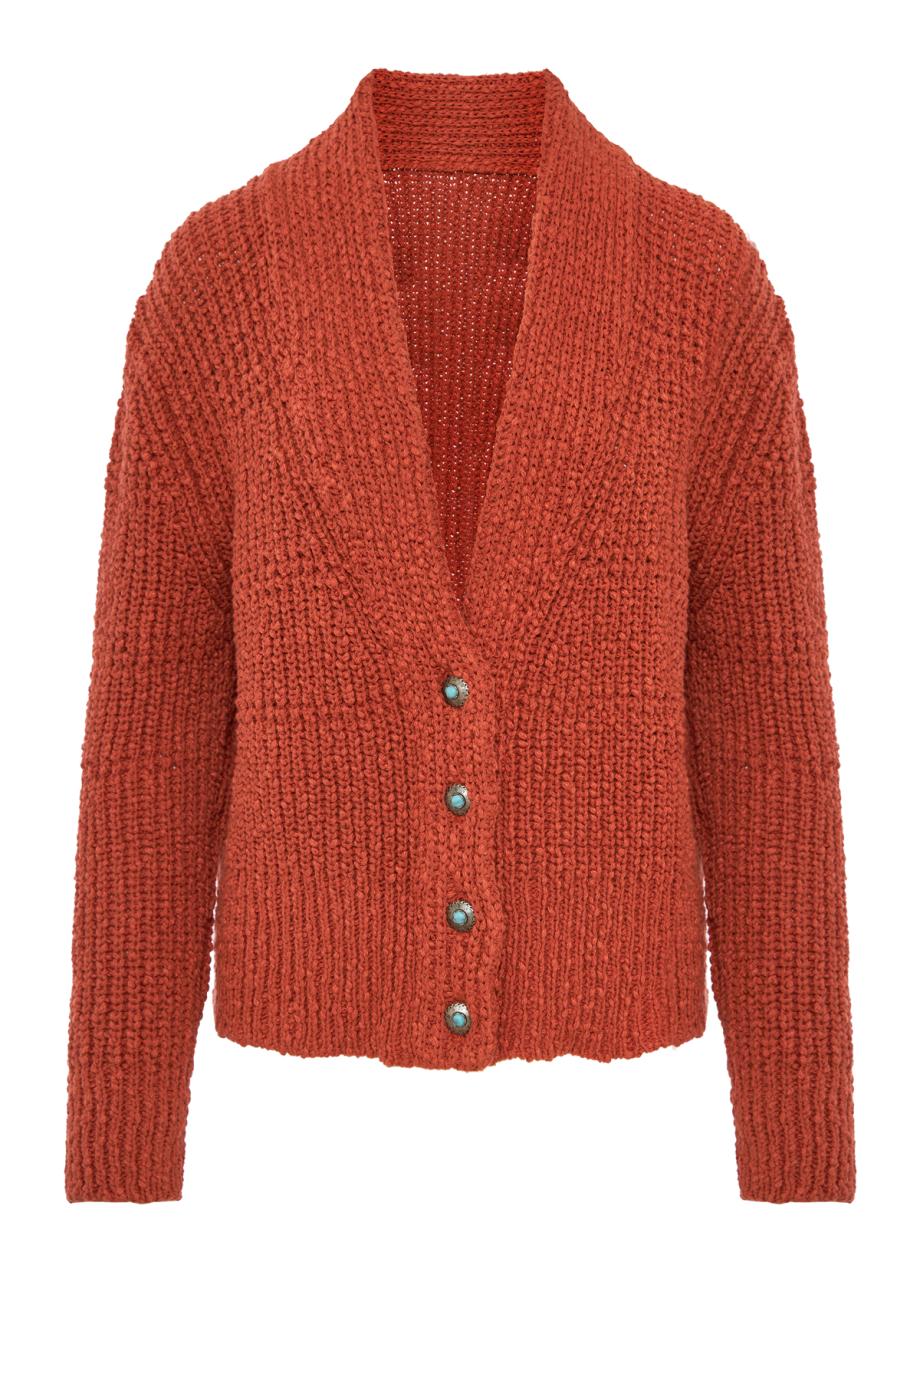 Lola knitted cotton cardigan